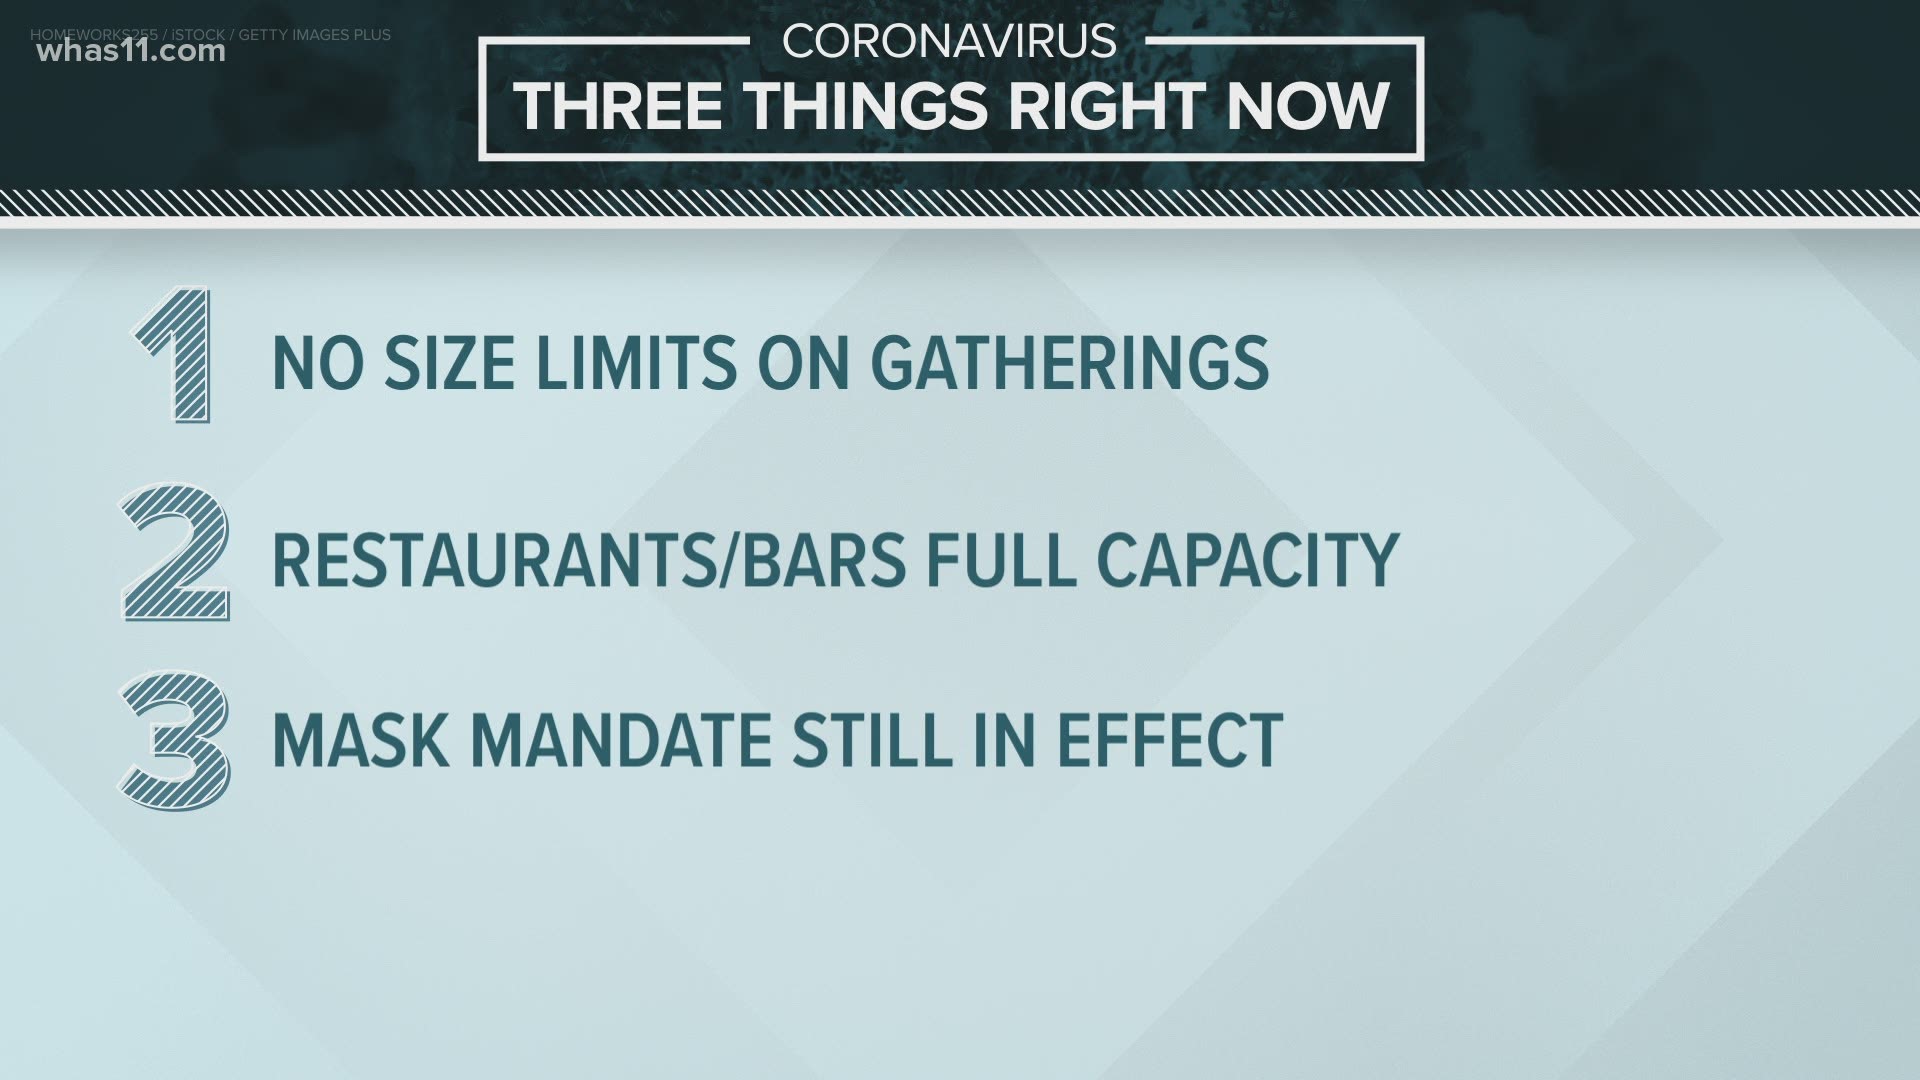 In Stage 5, gatherings will no longer have capacity limits and bars and restaurants will be allowed to operate at full capacity.